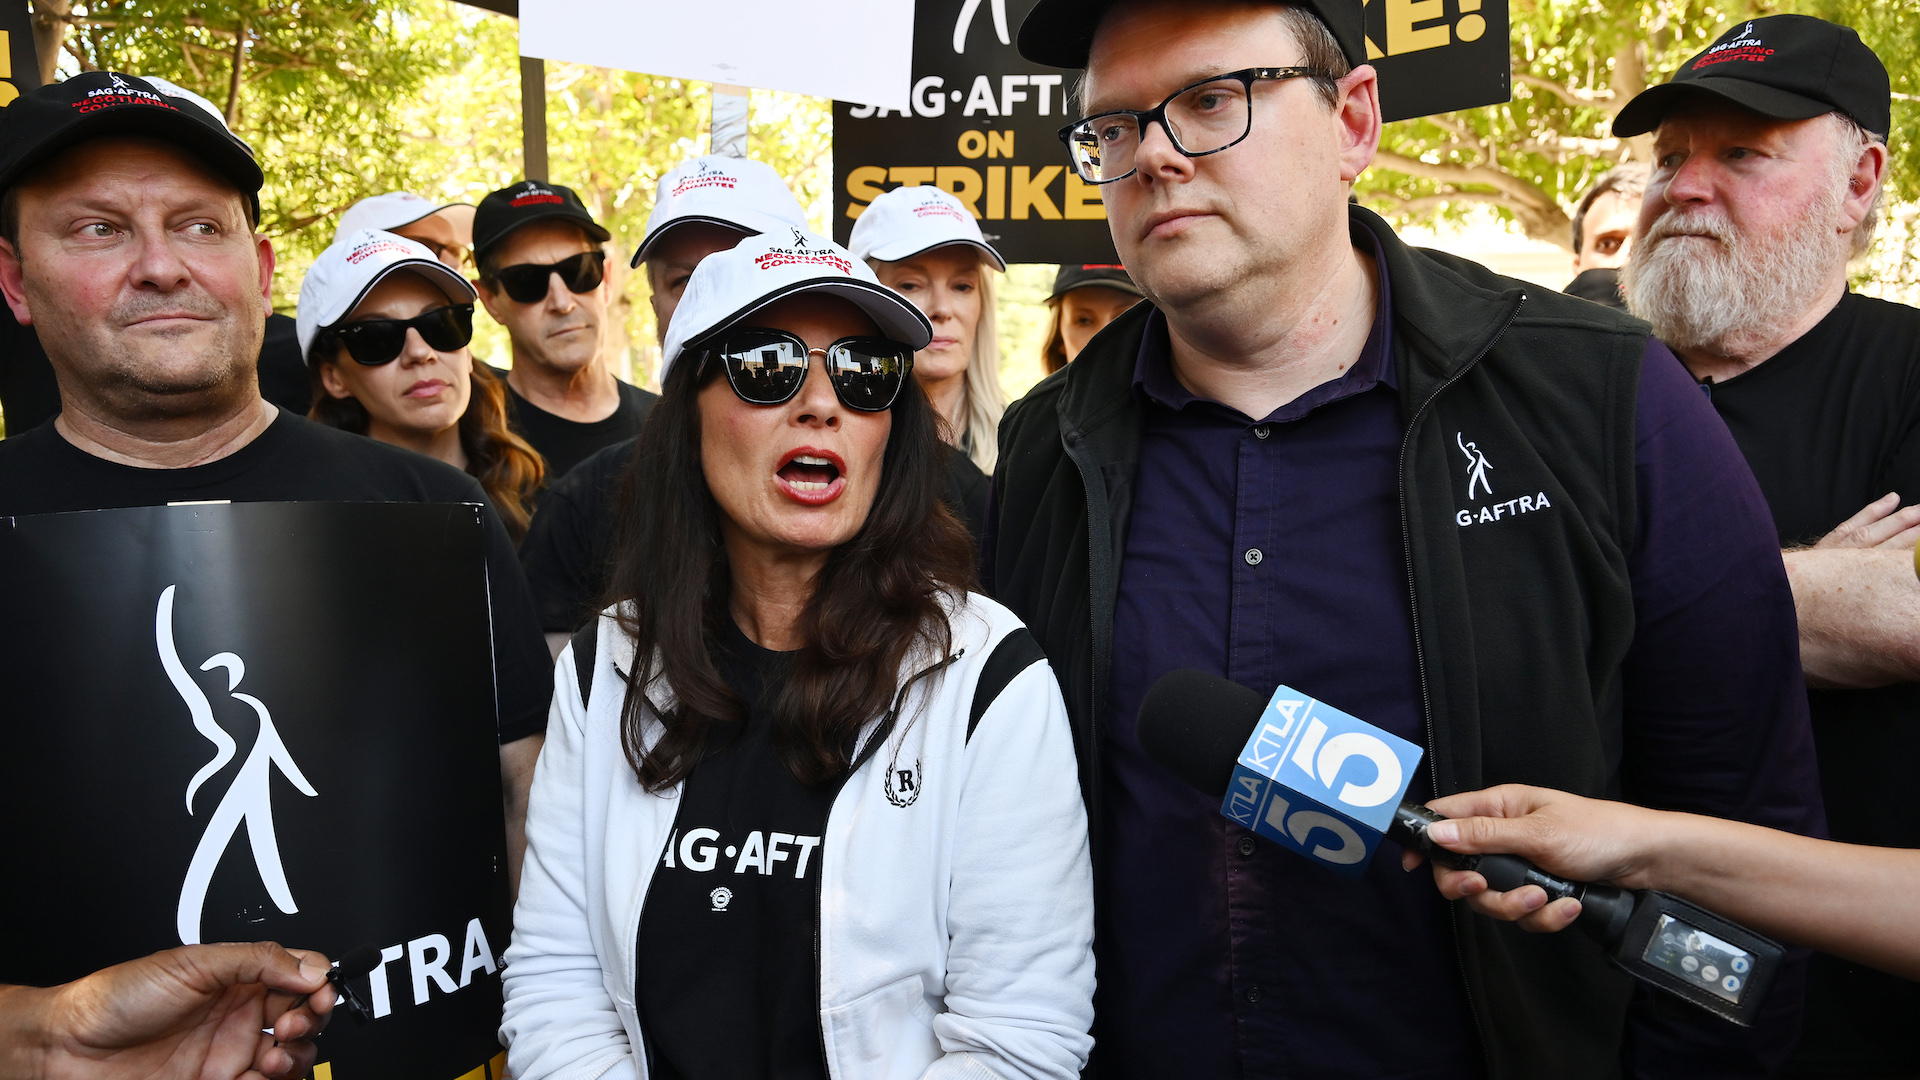 Fran Drescher and Duncan Crabtree-Ireland joins SAG-AFTRA and WGA Members and Supporters as they walk the picket line in support of the SAG-AFTRA and WGA strike at the Warner Bros. Studio on July 14, 2023 in Los Angeles, California.